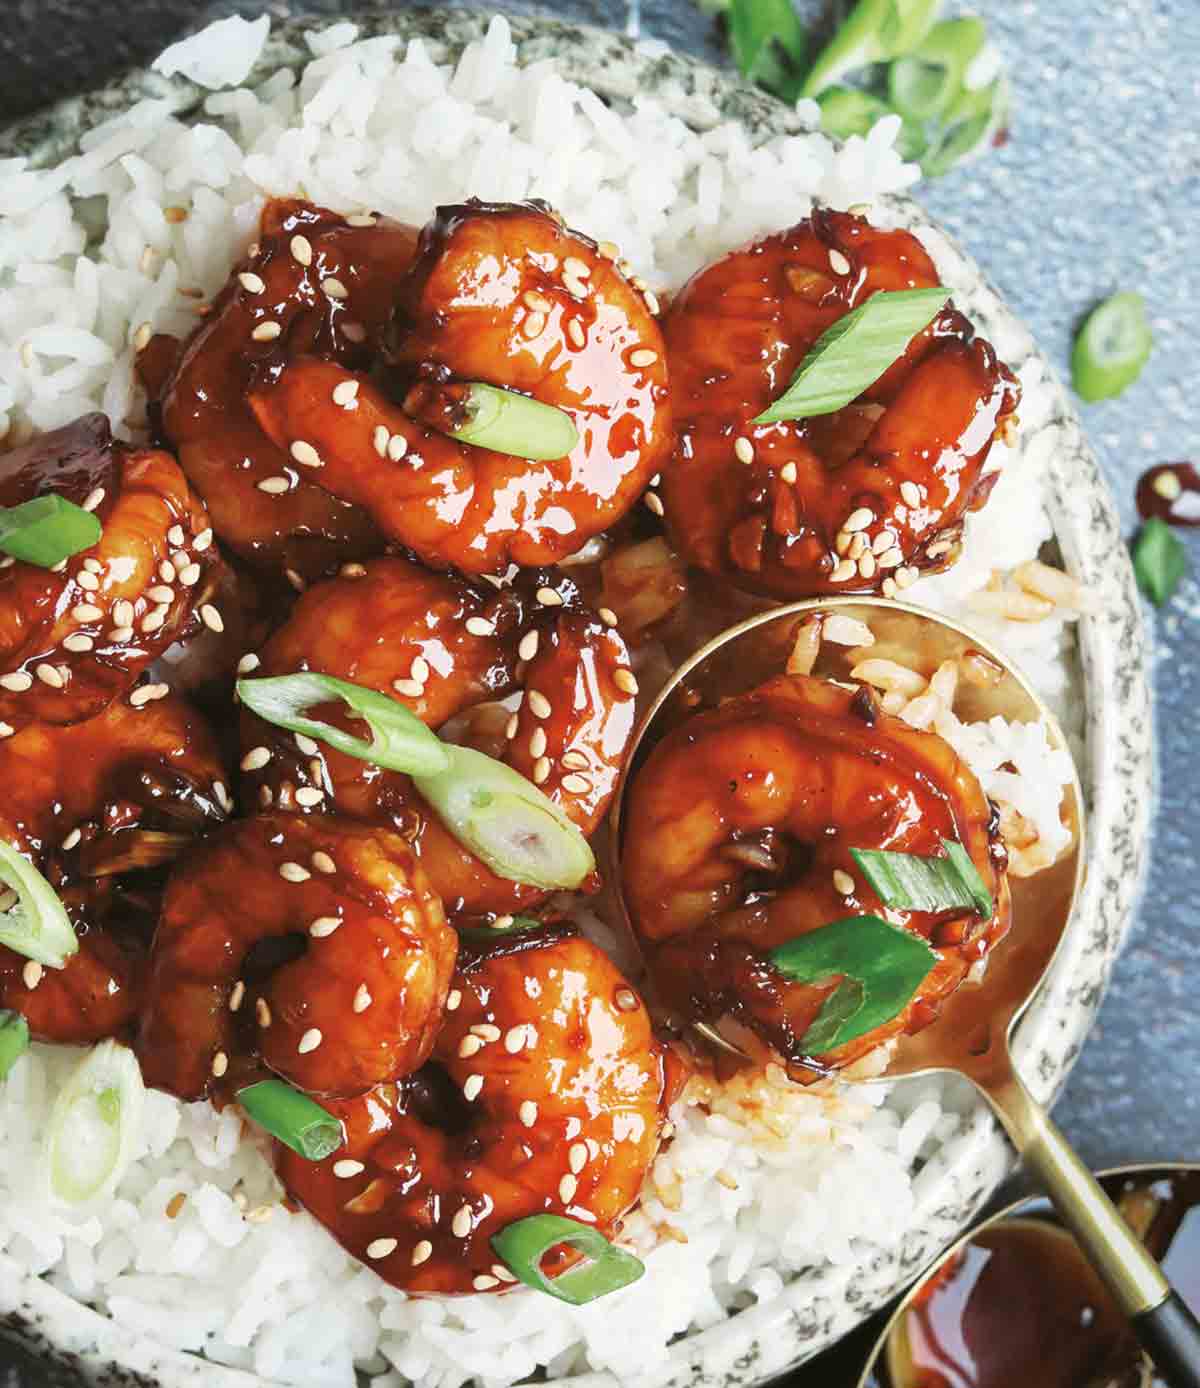 Glazed shrimp on top of rice and garnished with scallions, with a gold spoon scooping some from the bowl.